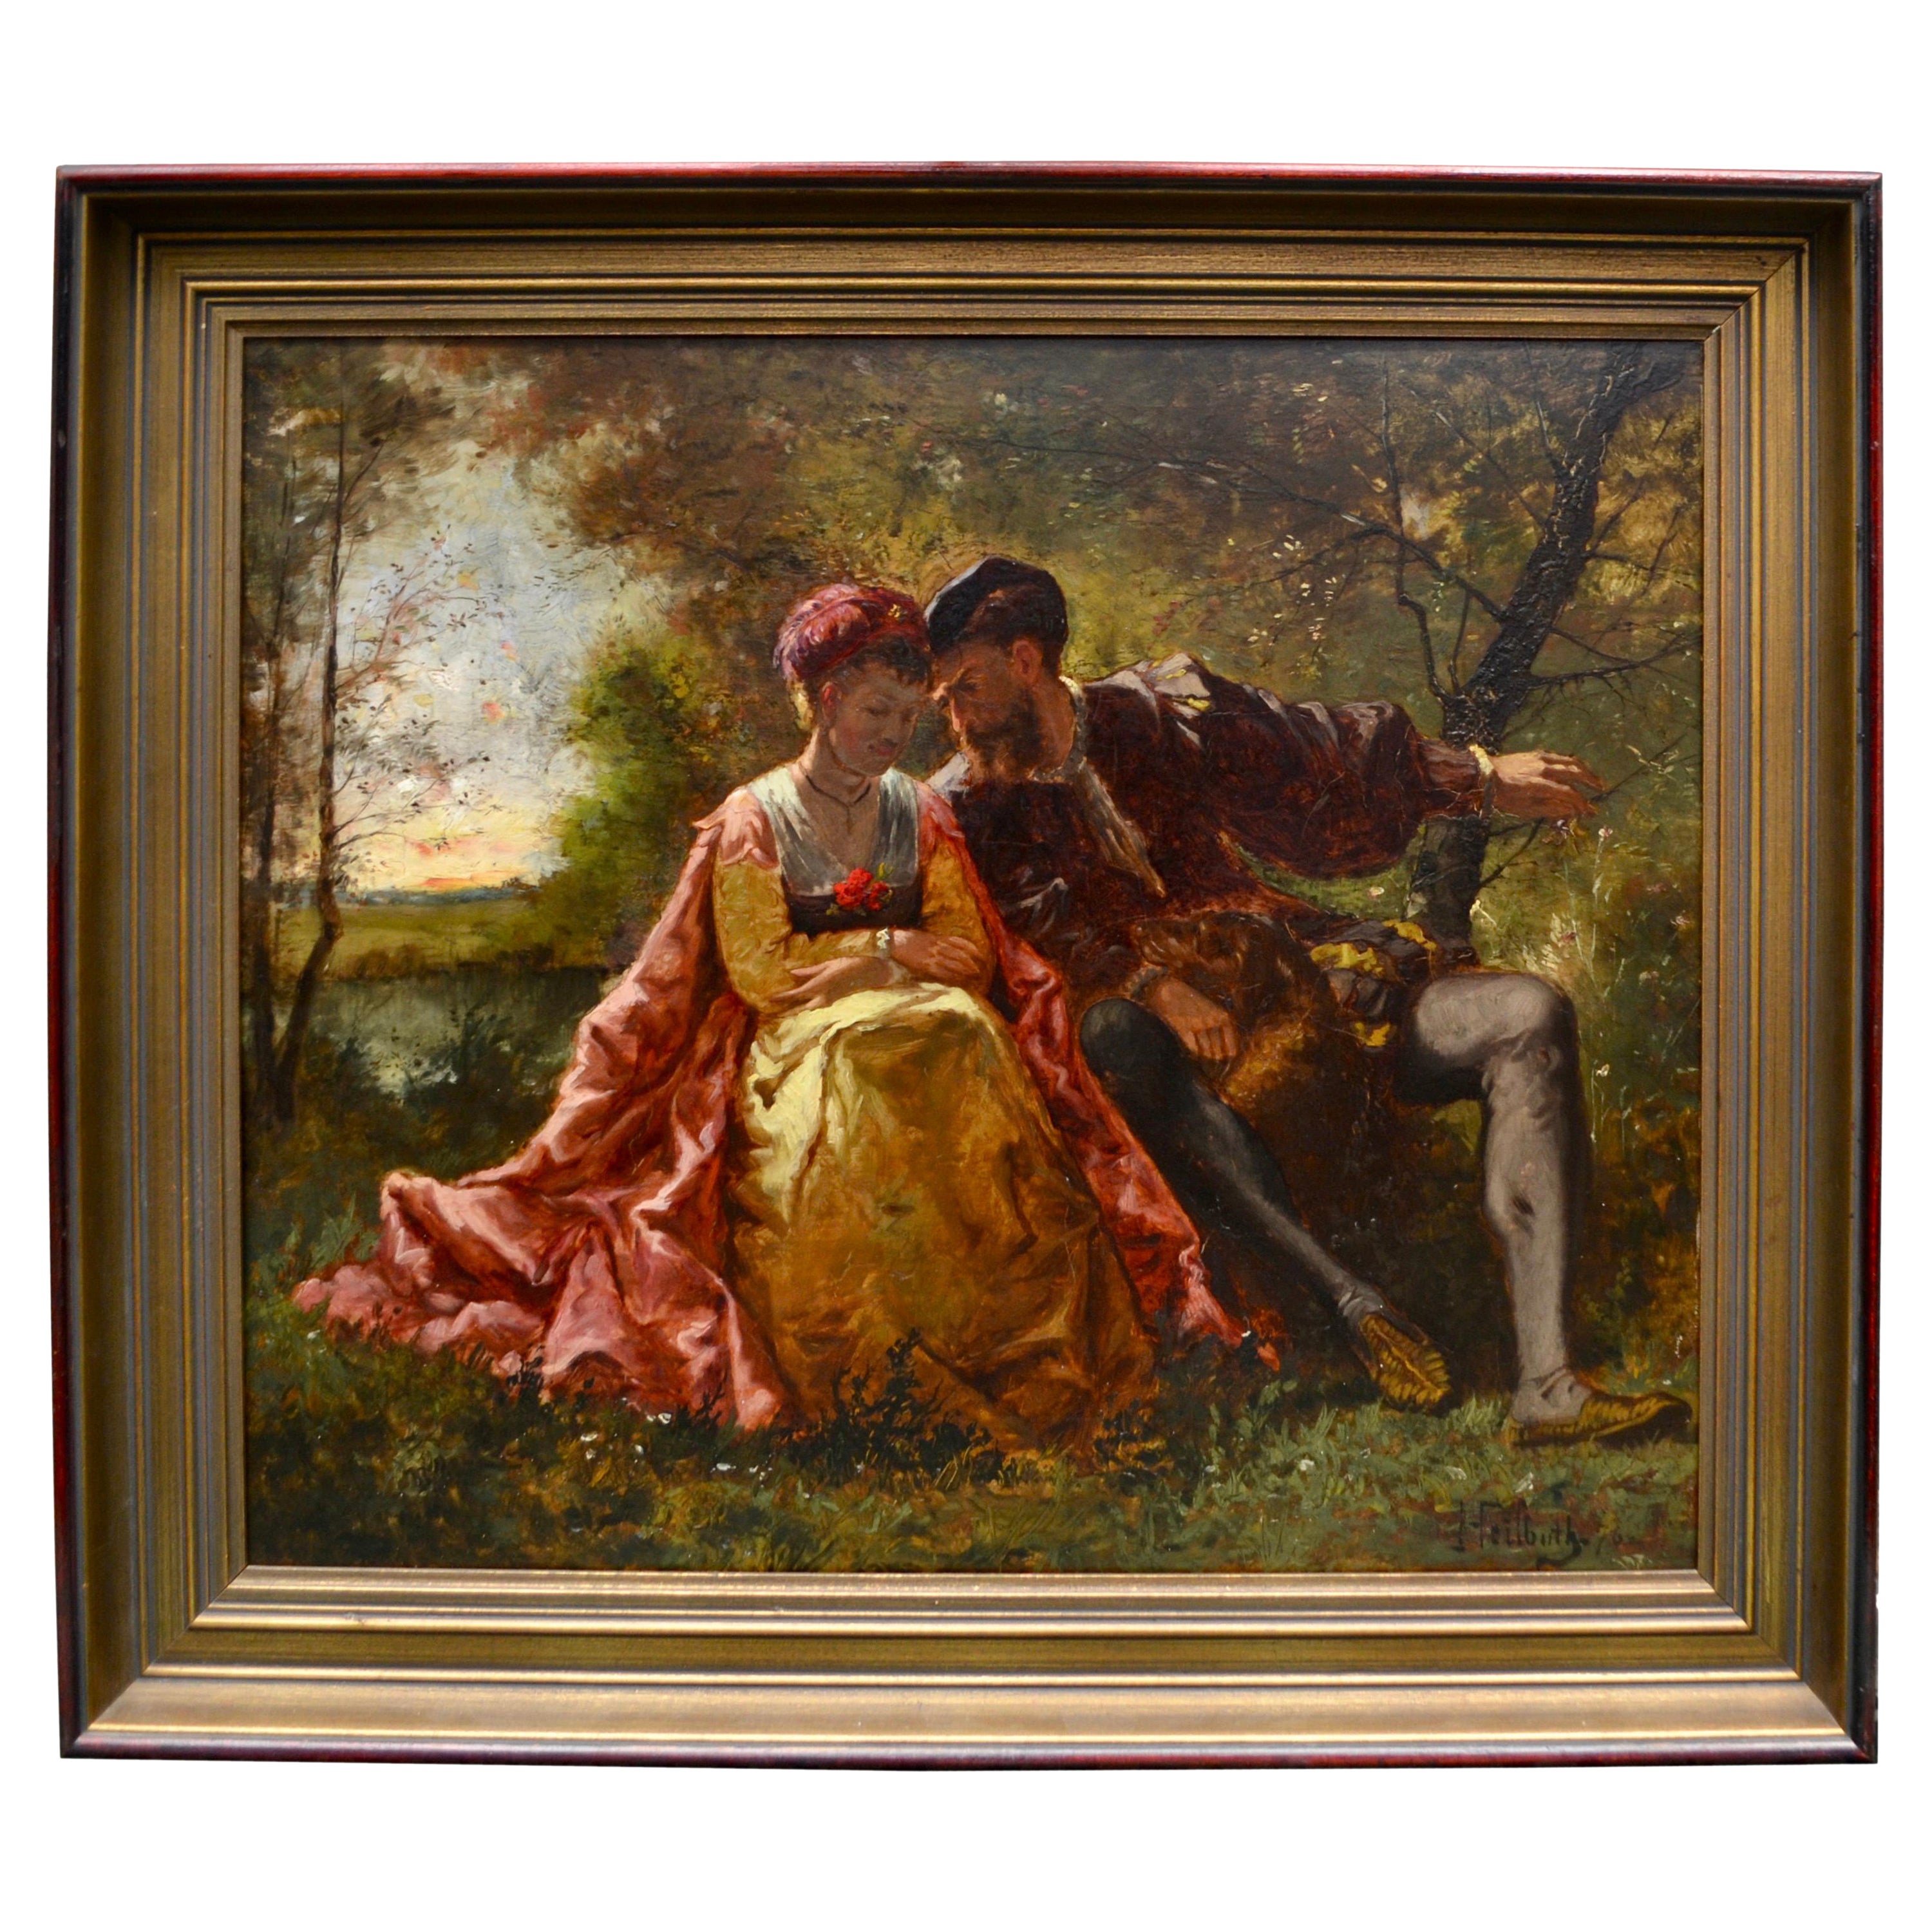 "Lovers in the Park” by German/French Artist Ferdinand Heilbuth For Sale